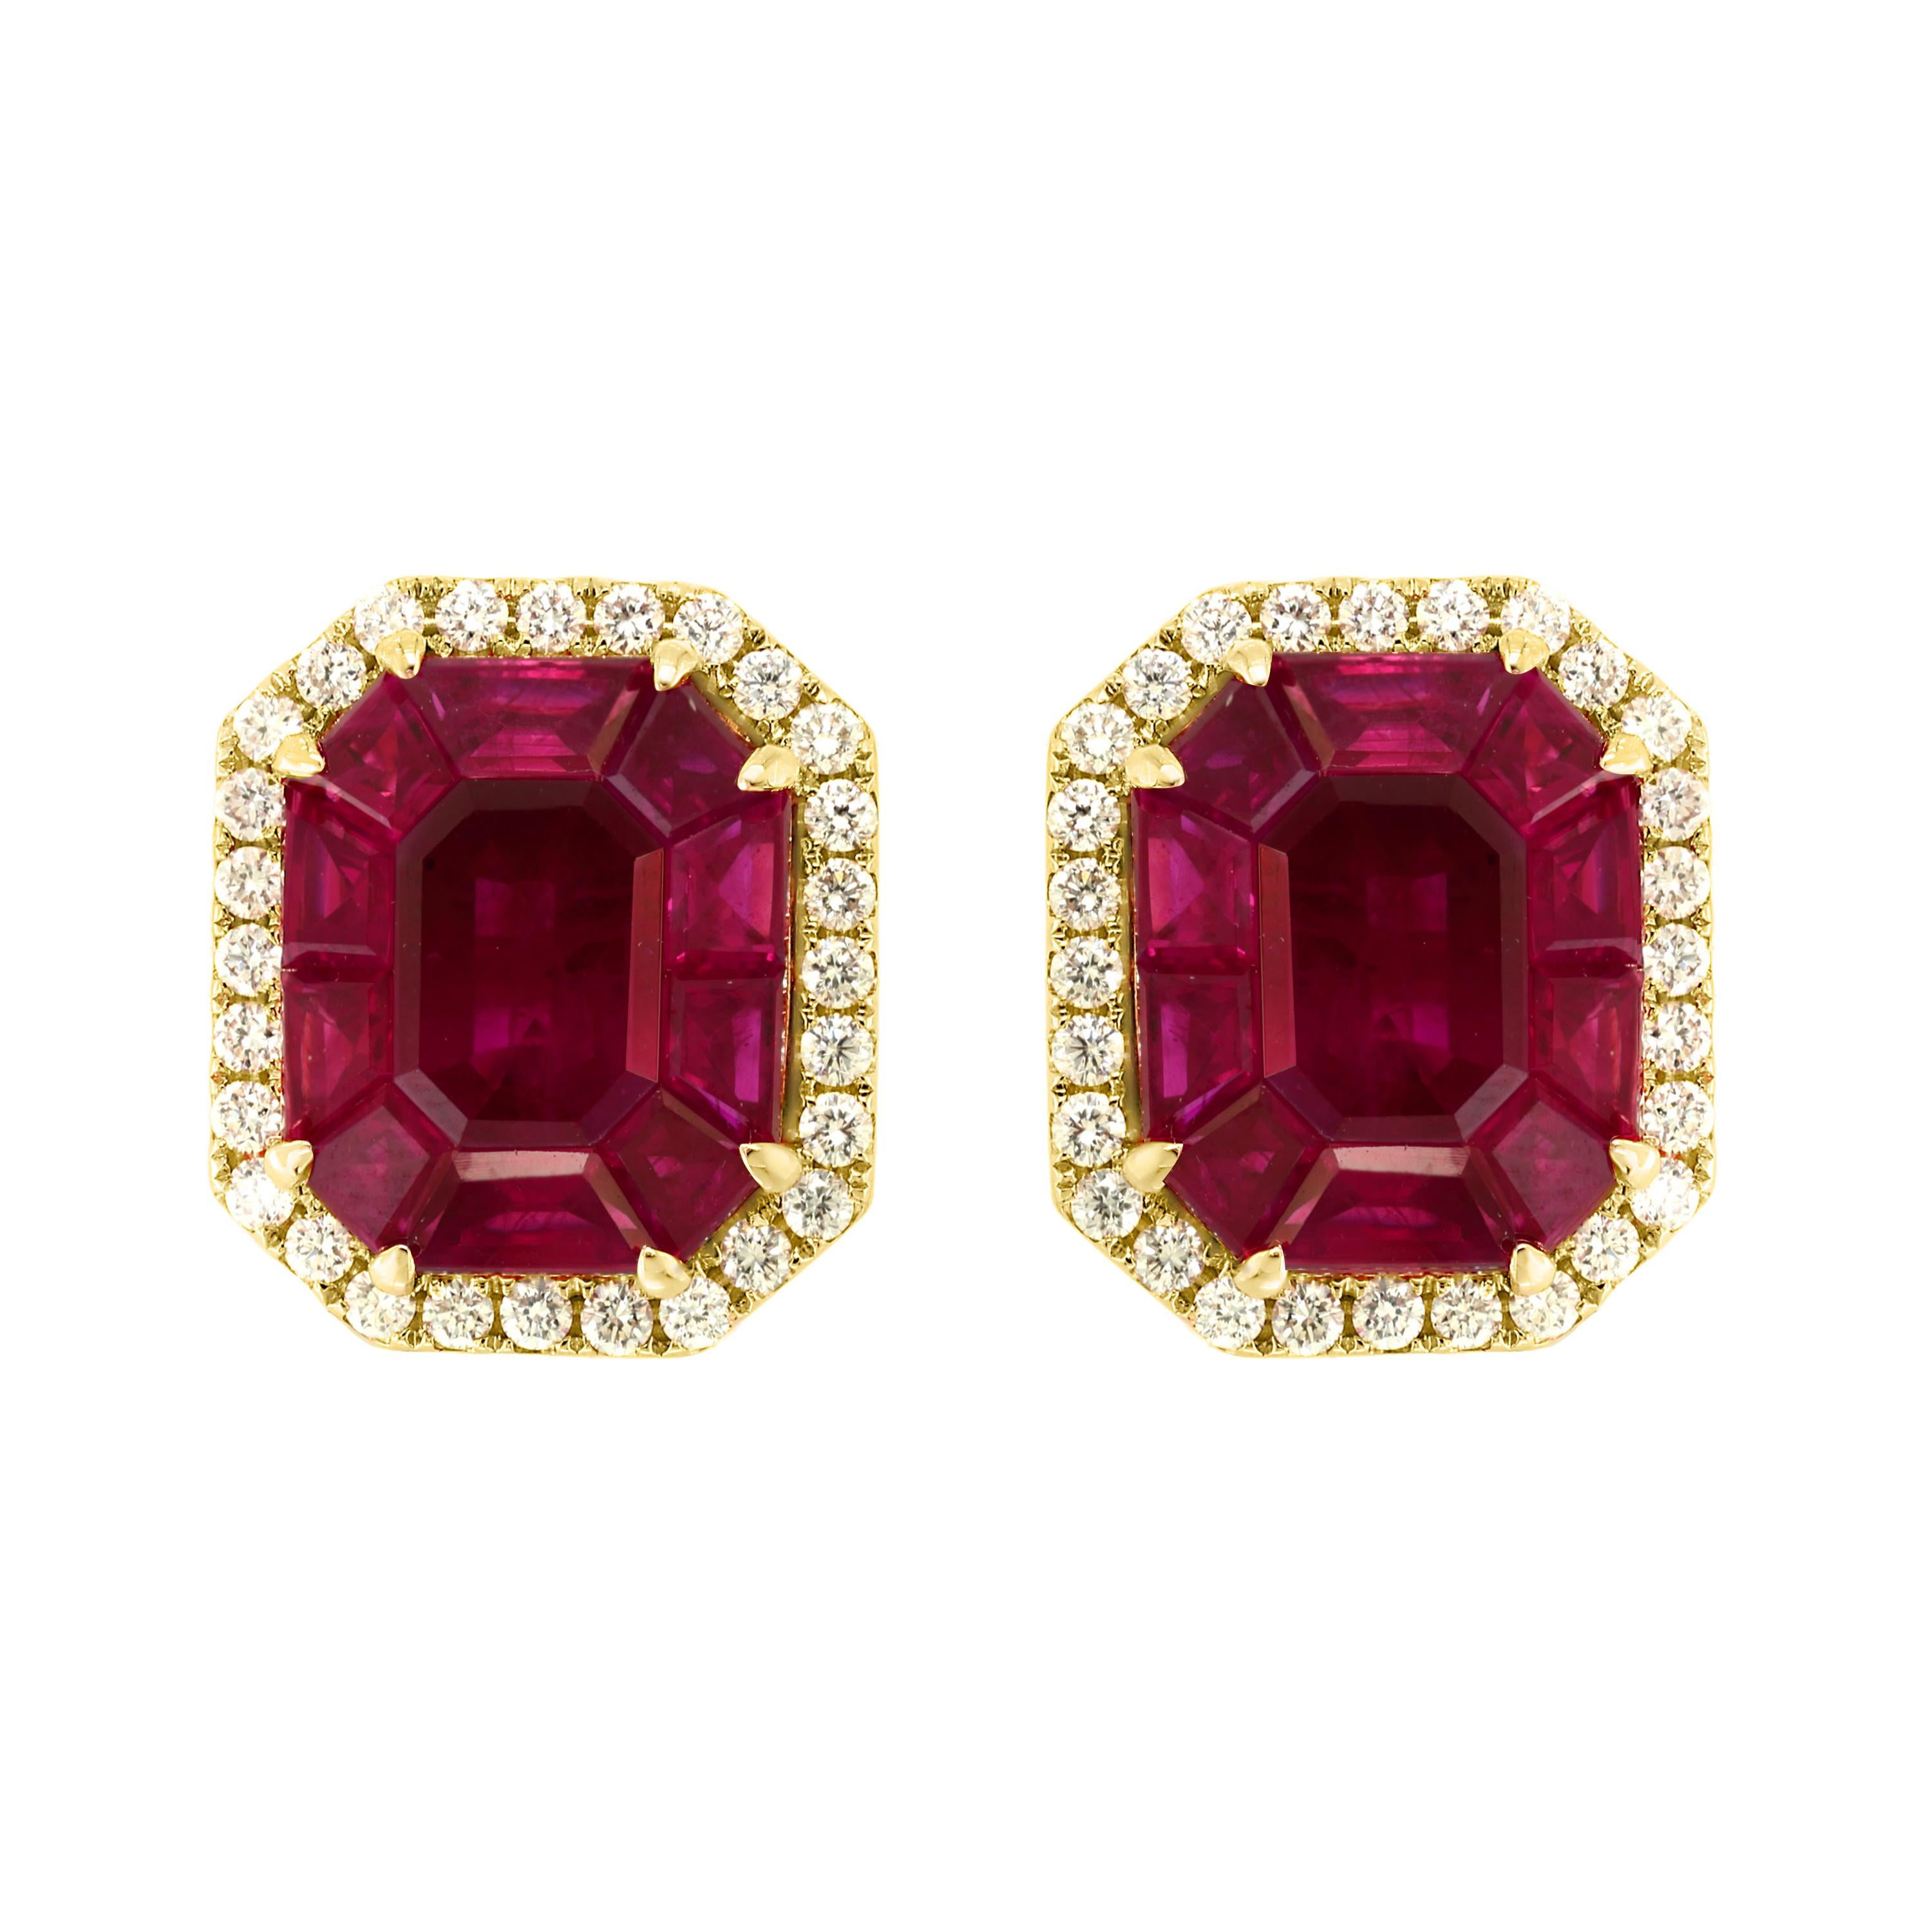 12 Carat Natural Burma Ruby and Diamond Earring in 18 Karat Yellow Gold For Sale